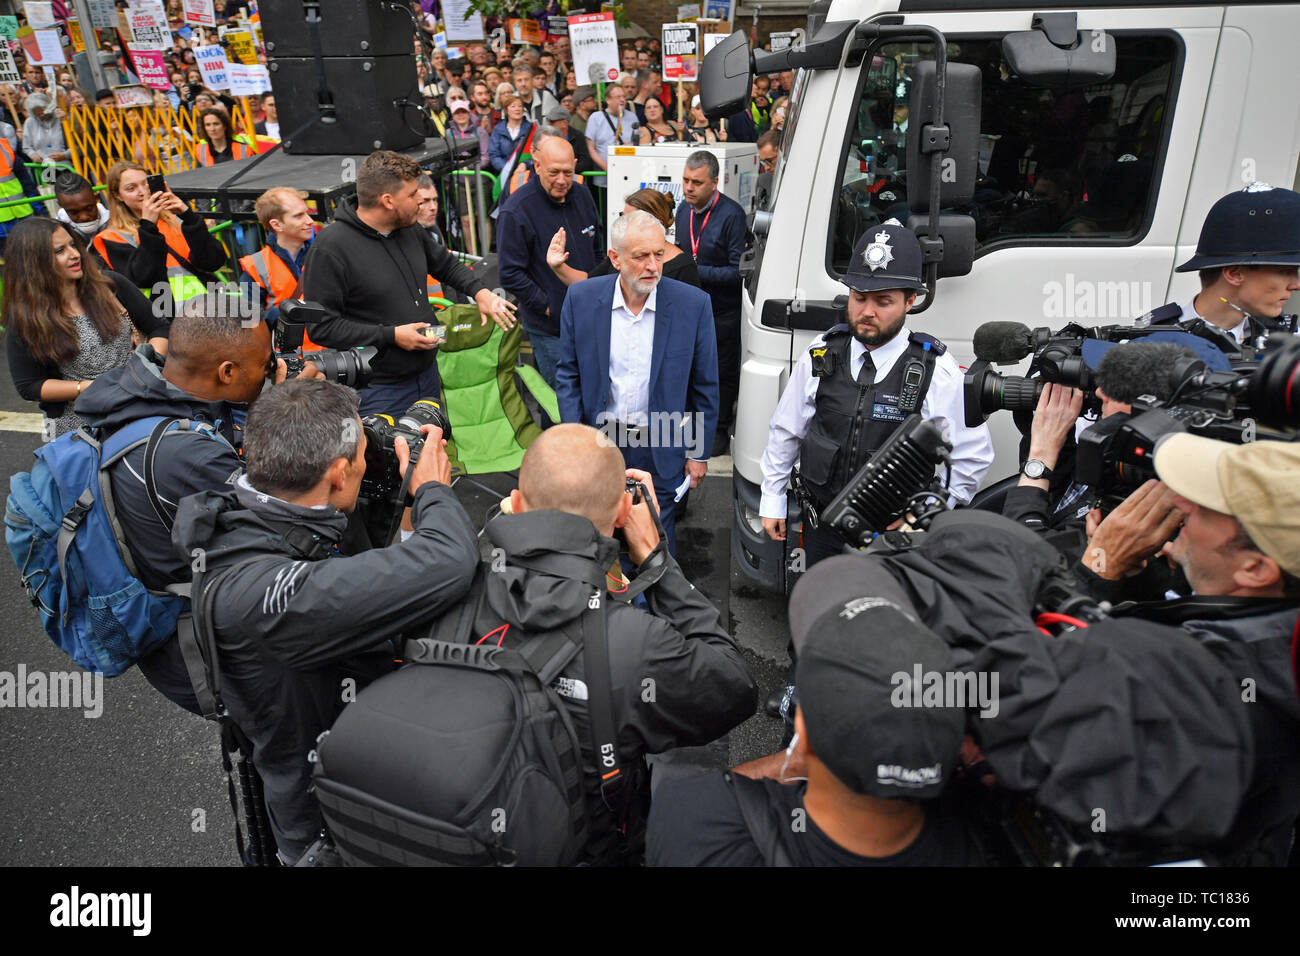 Labour party leader Jeremy Corbyn arrives to speak at an anti-Trump protest in Whitehall, London, on the second day of the state visit to the UK by US President Donald Trump. Stock Photo